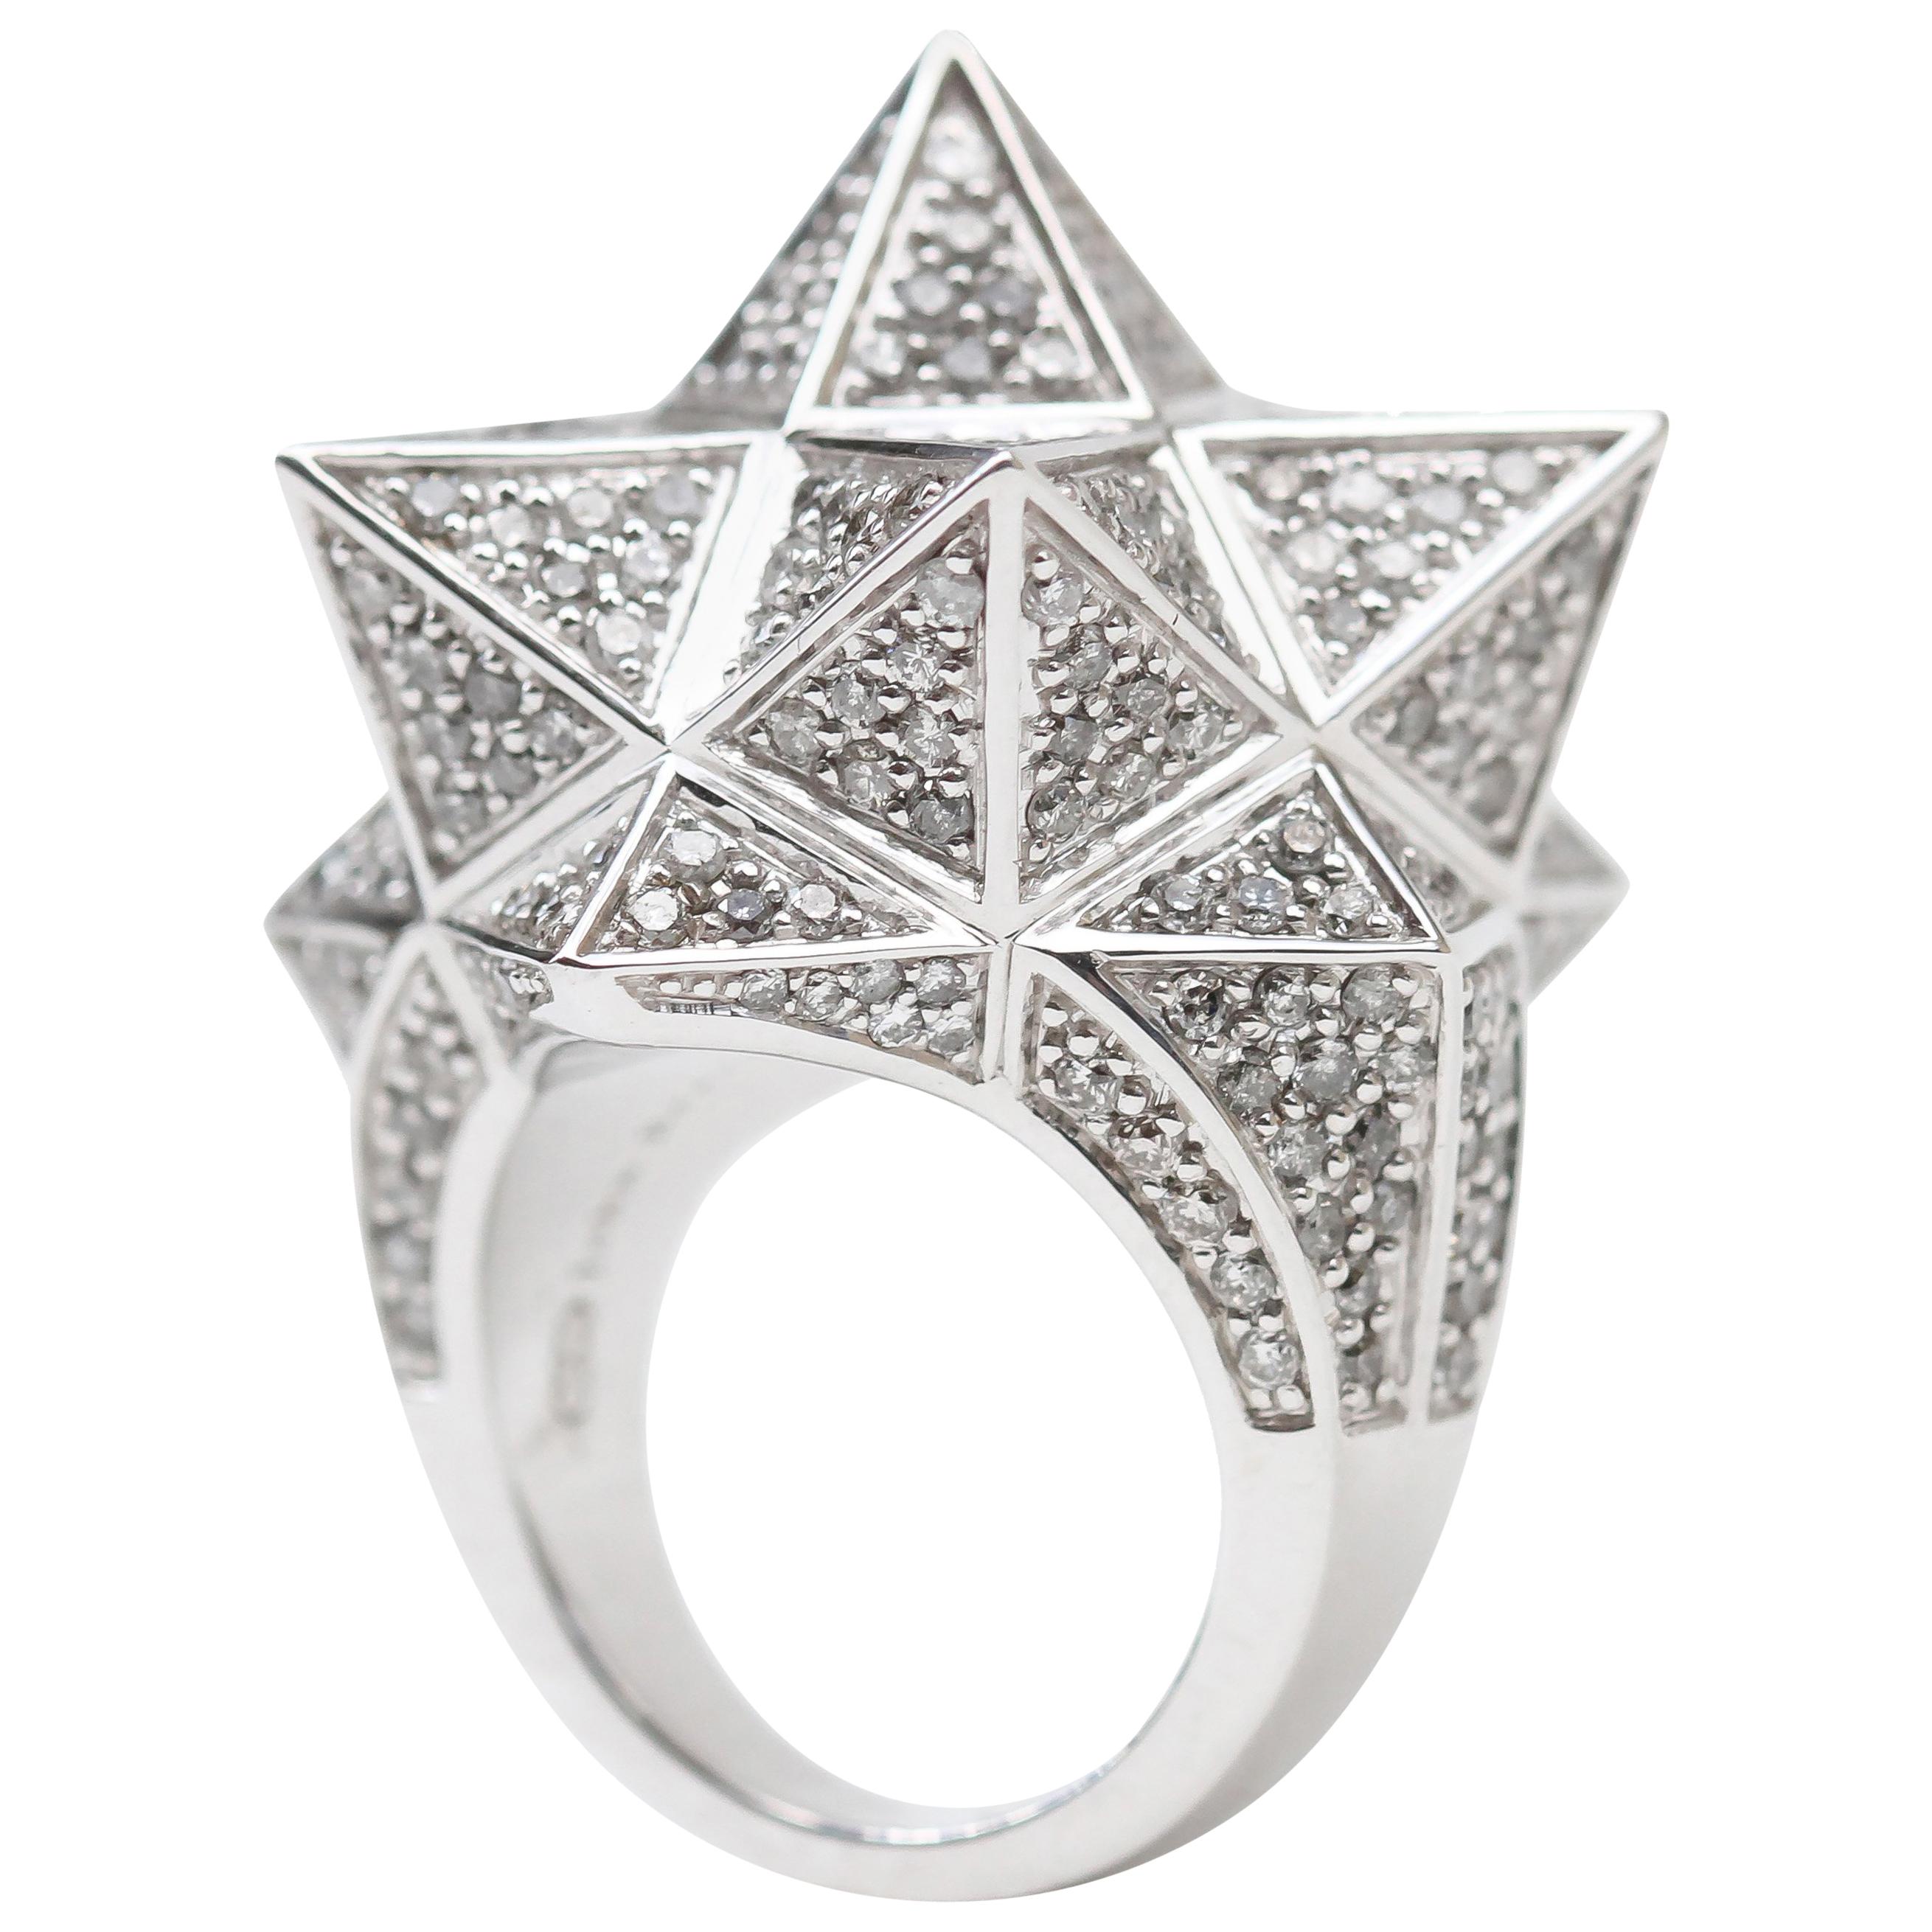 Tetra Star Ring in 18K White Gold and Gray Diamonds